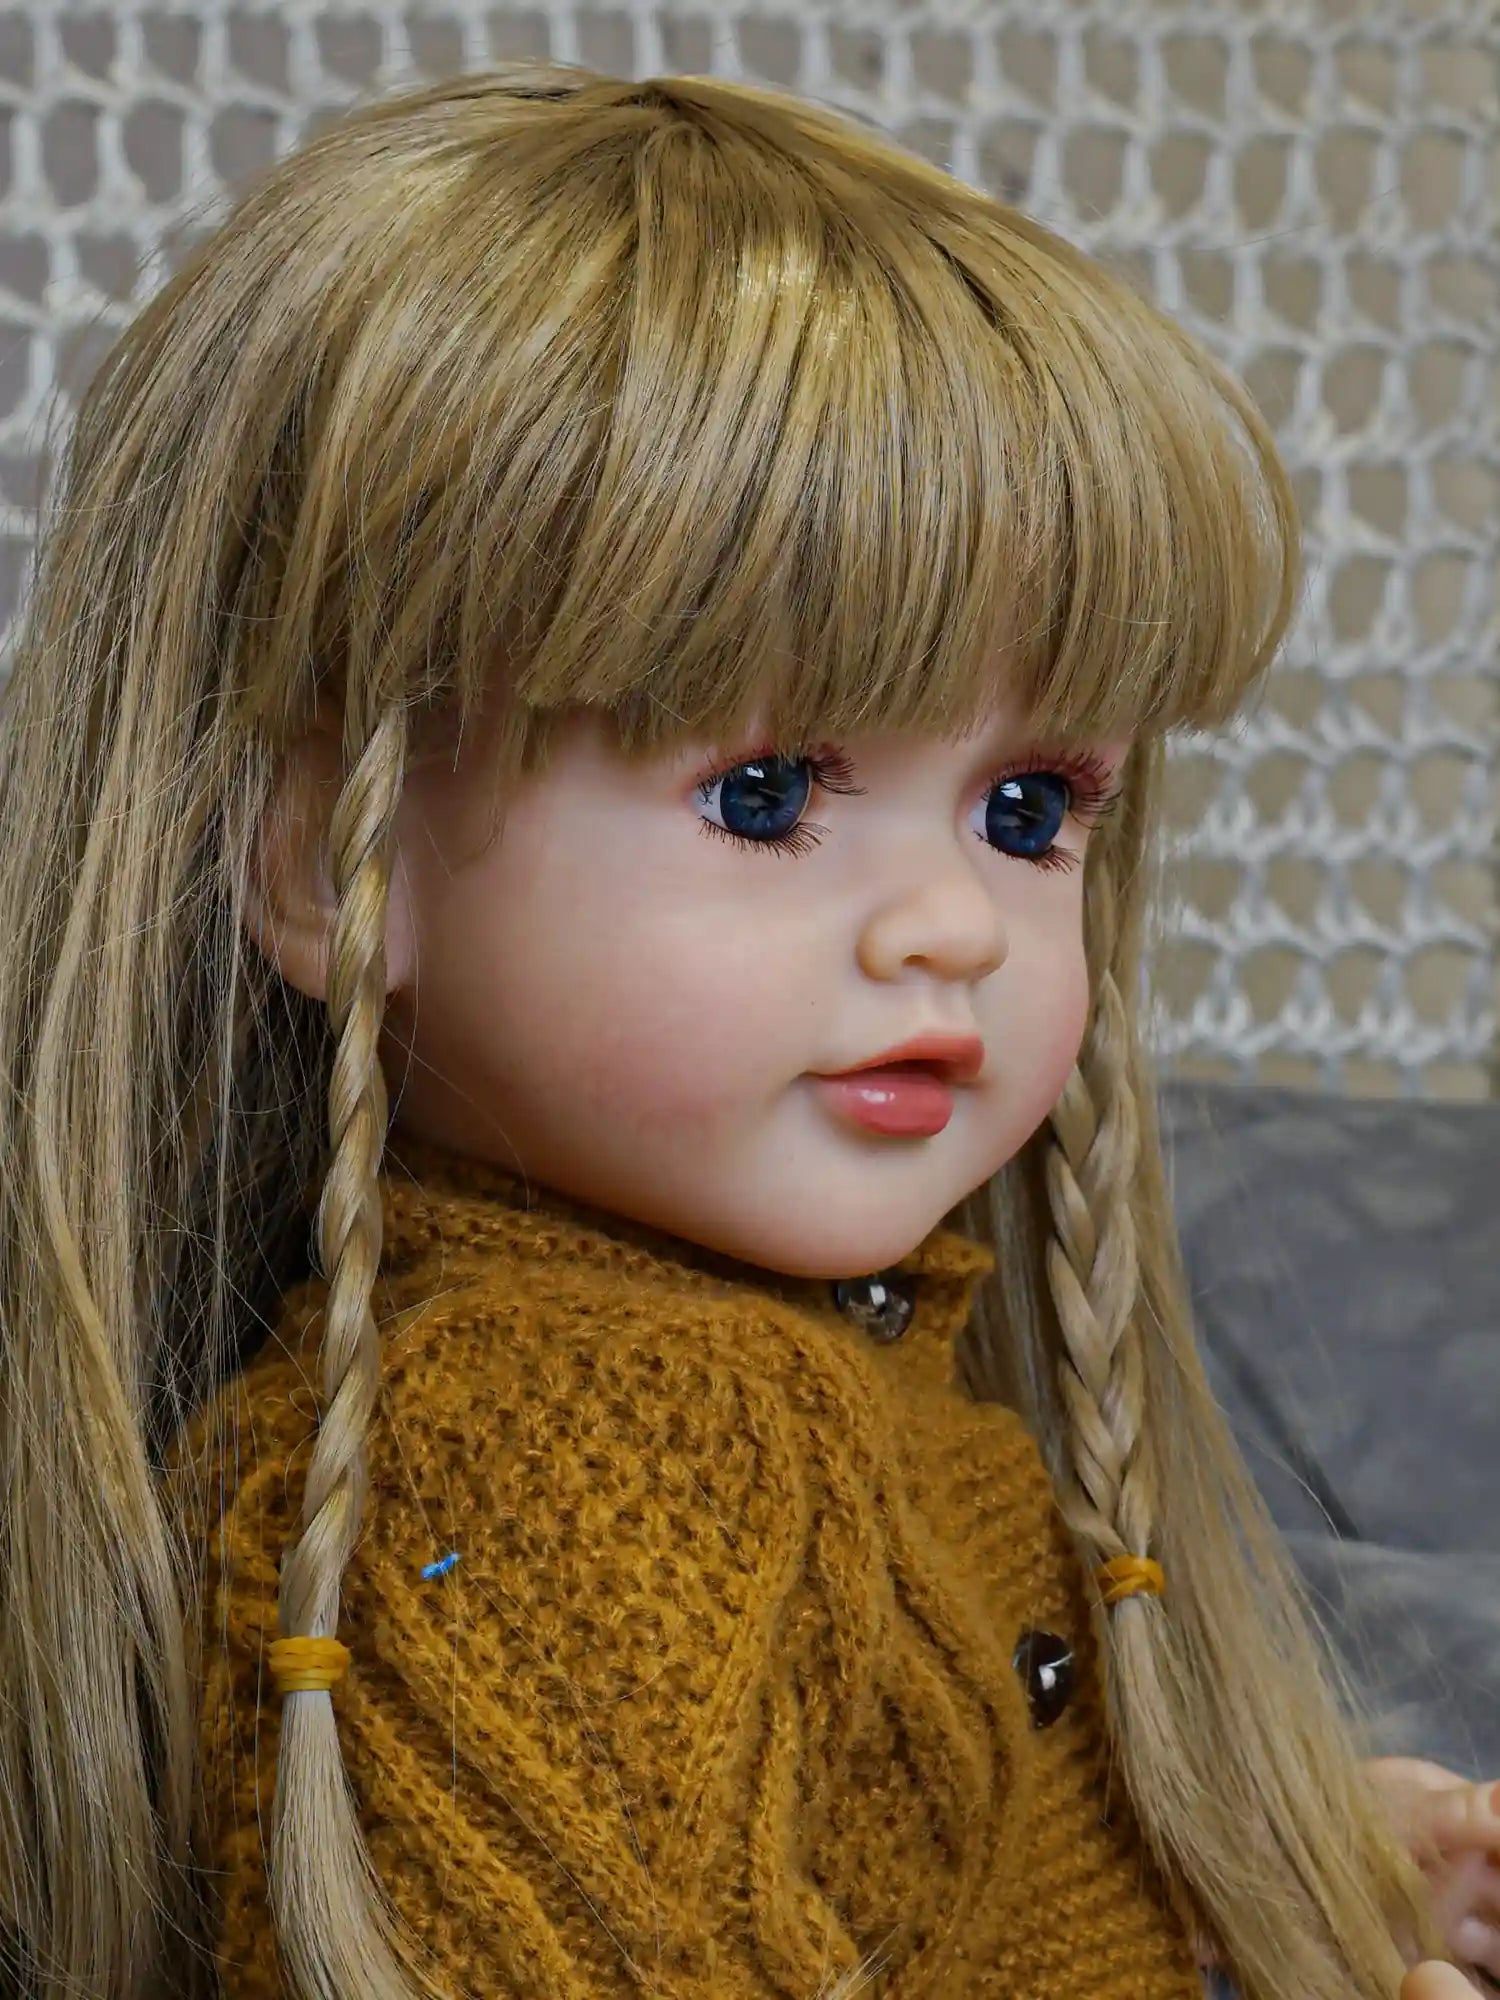 A realistic doll with braided hair and a thoughtful gaze, clothed in a chunky knit mustard sweater and hat, contrasting with the delicate grey and white background.